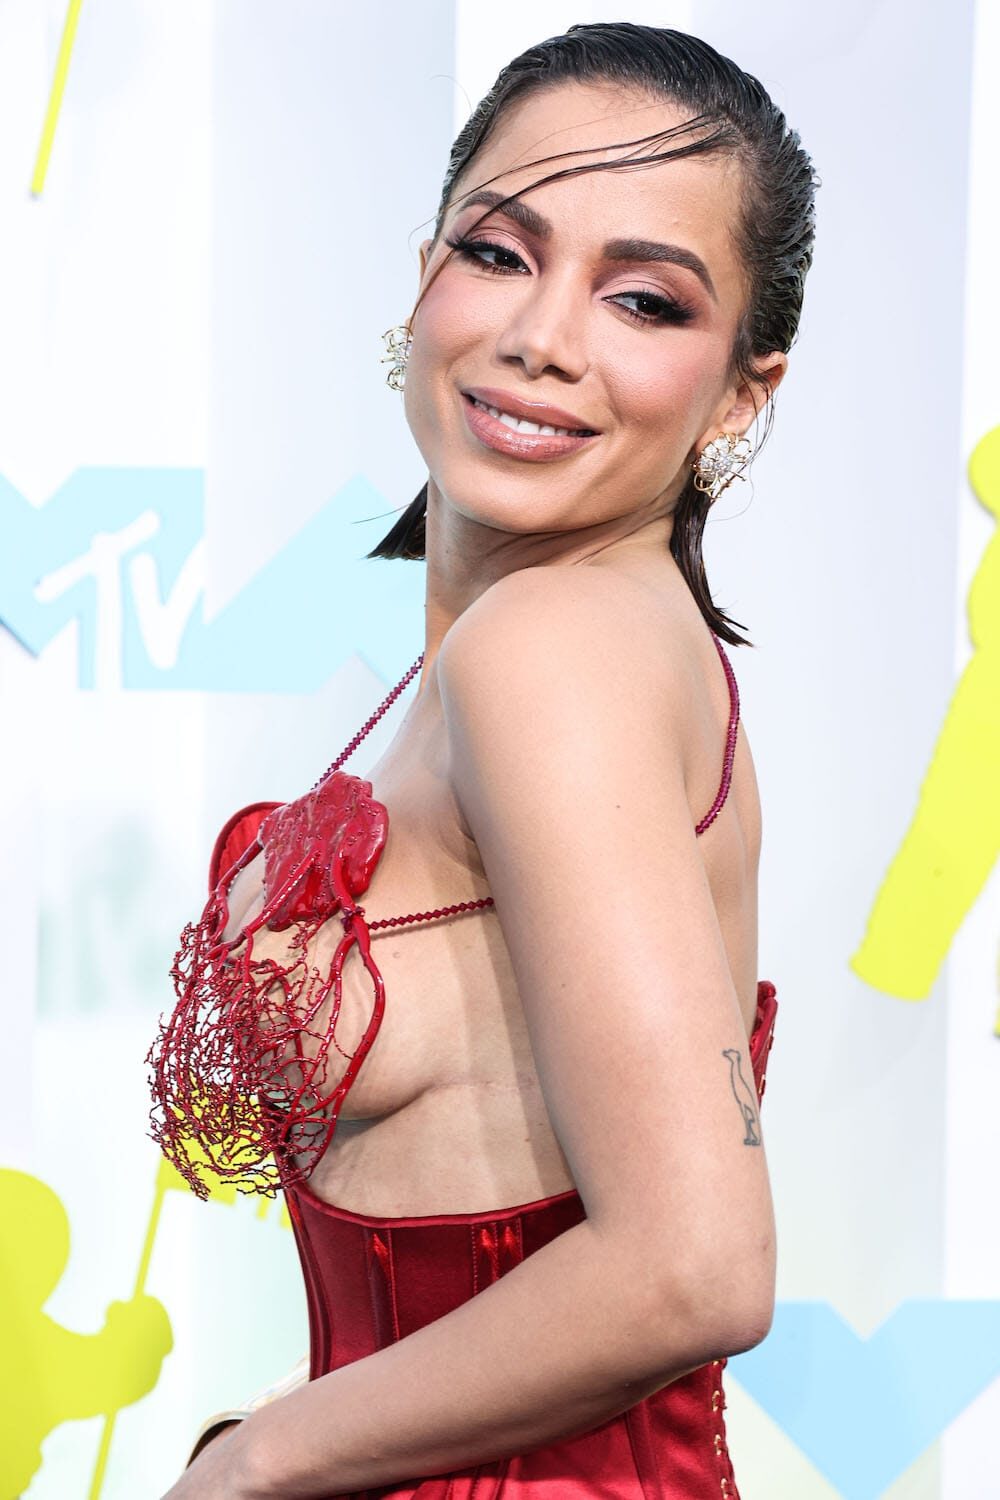 Anitta in Iconic ‘The Issey Miyake AW 1980/81 bustier’ at 2022 American Music Awards